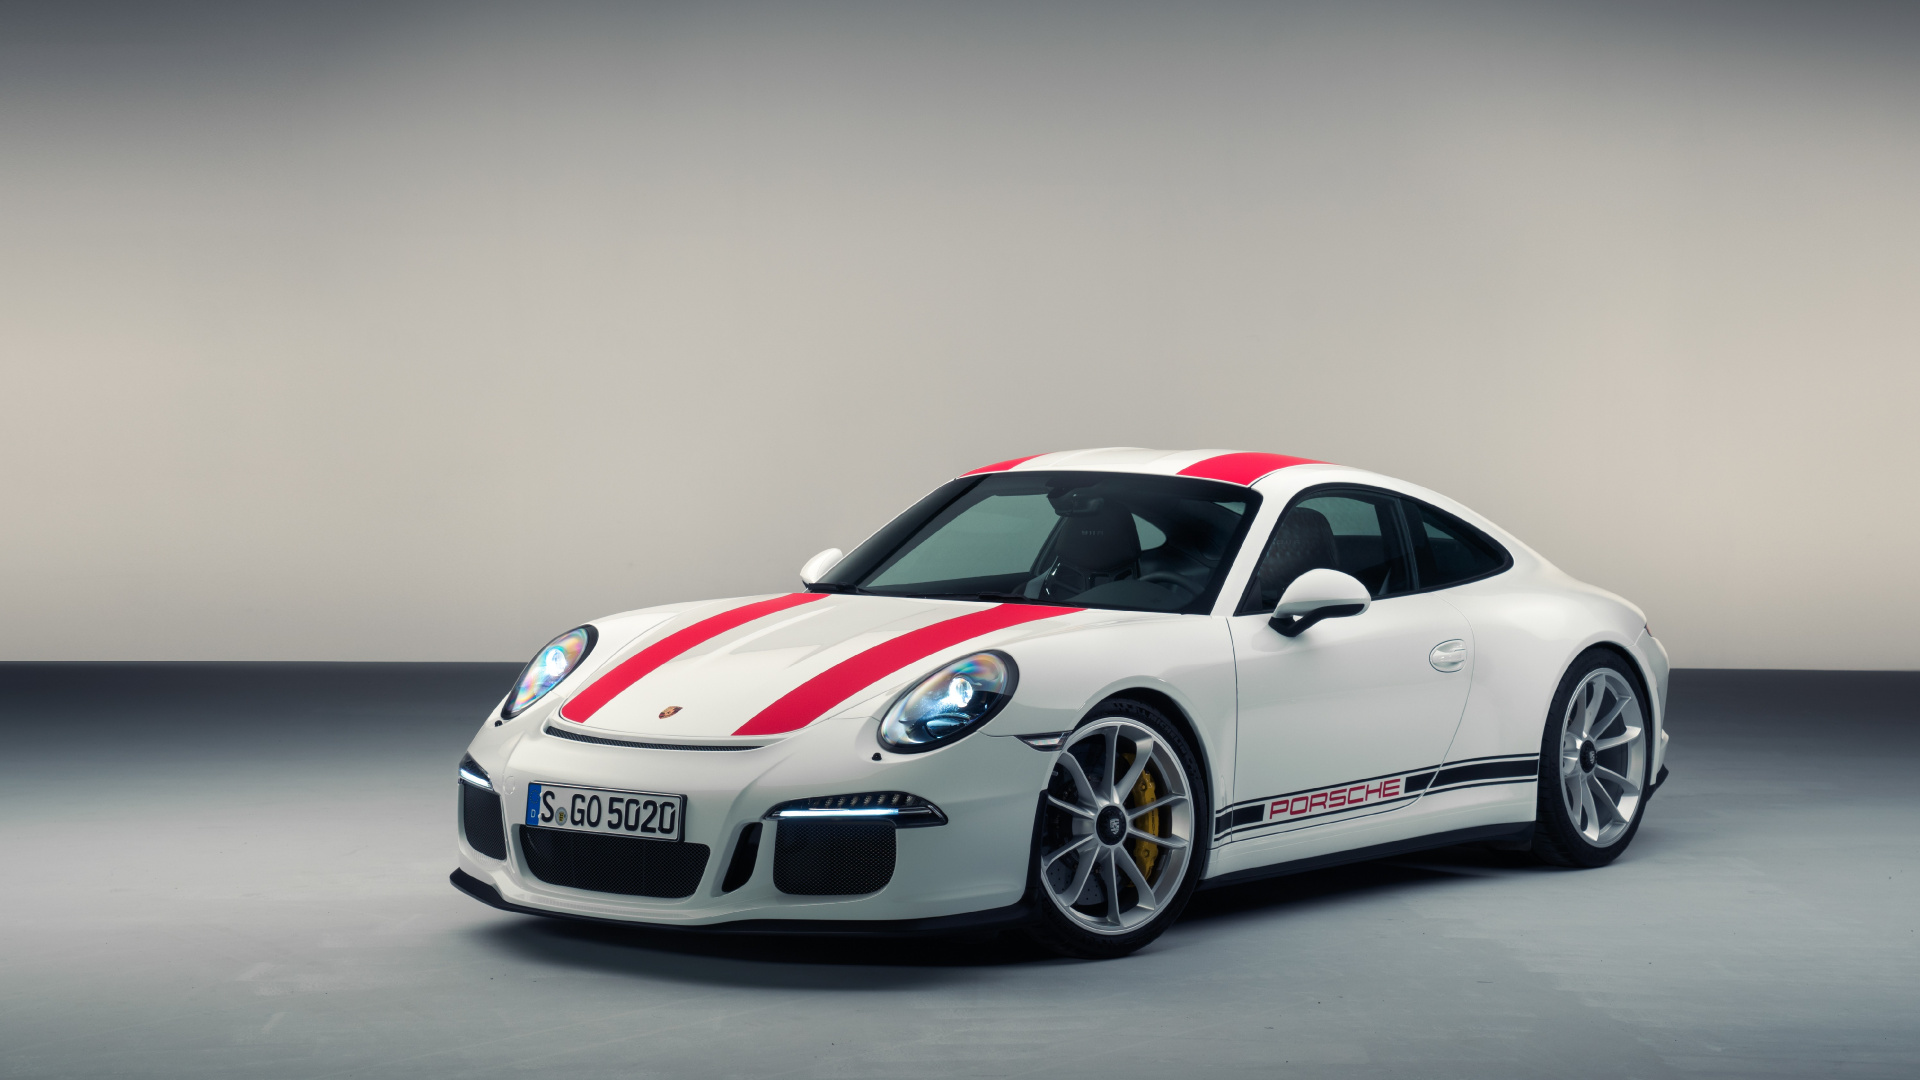 White and Red Porsche 911. Wallpaper in 1920x1080 Resolution